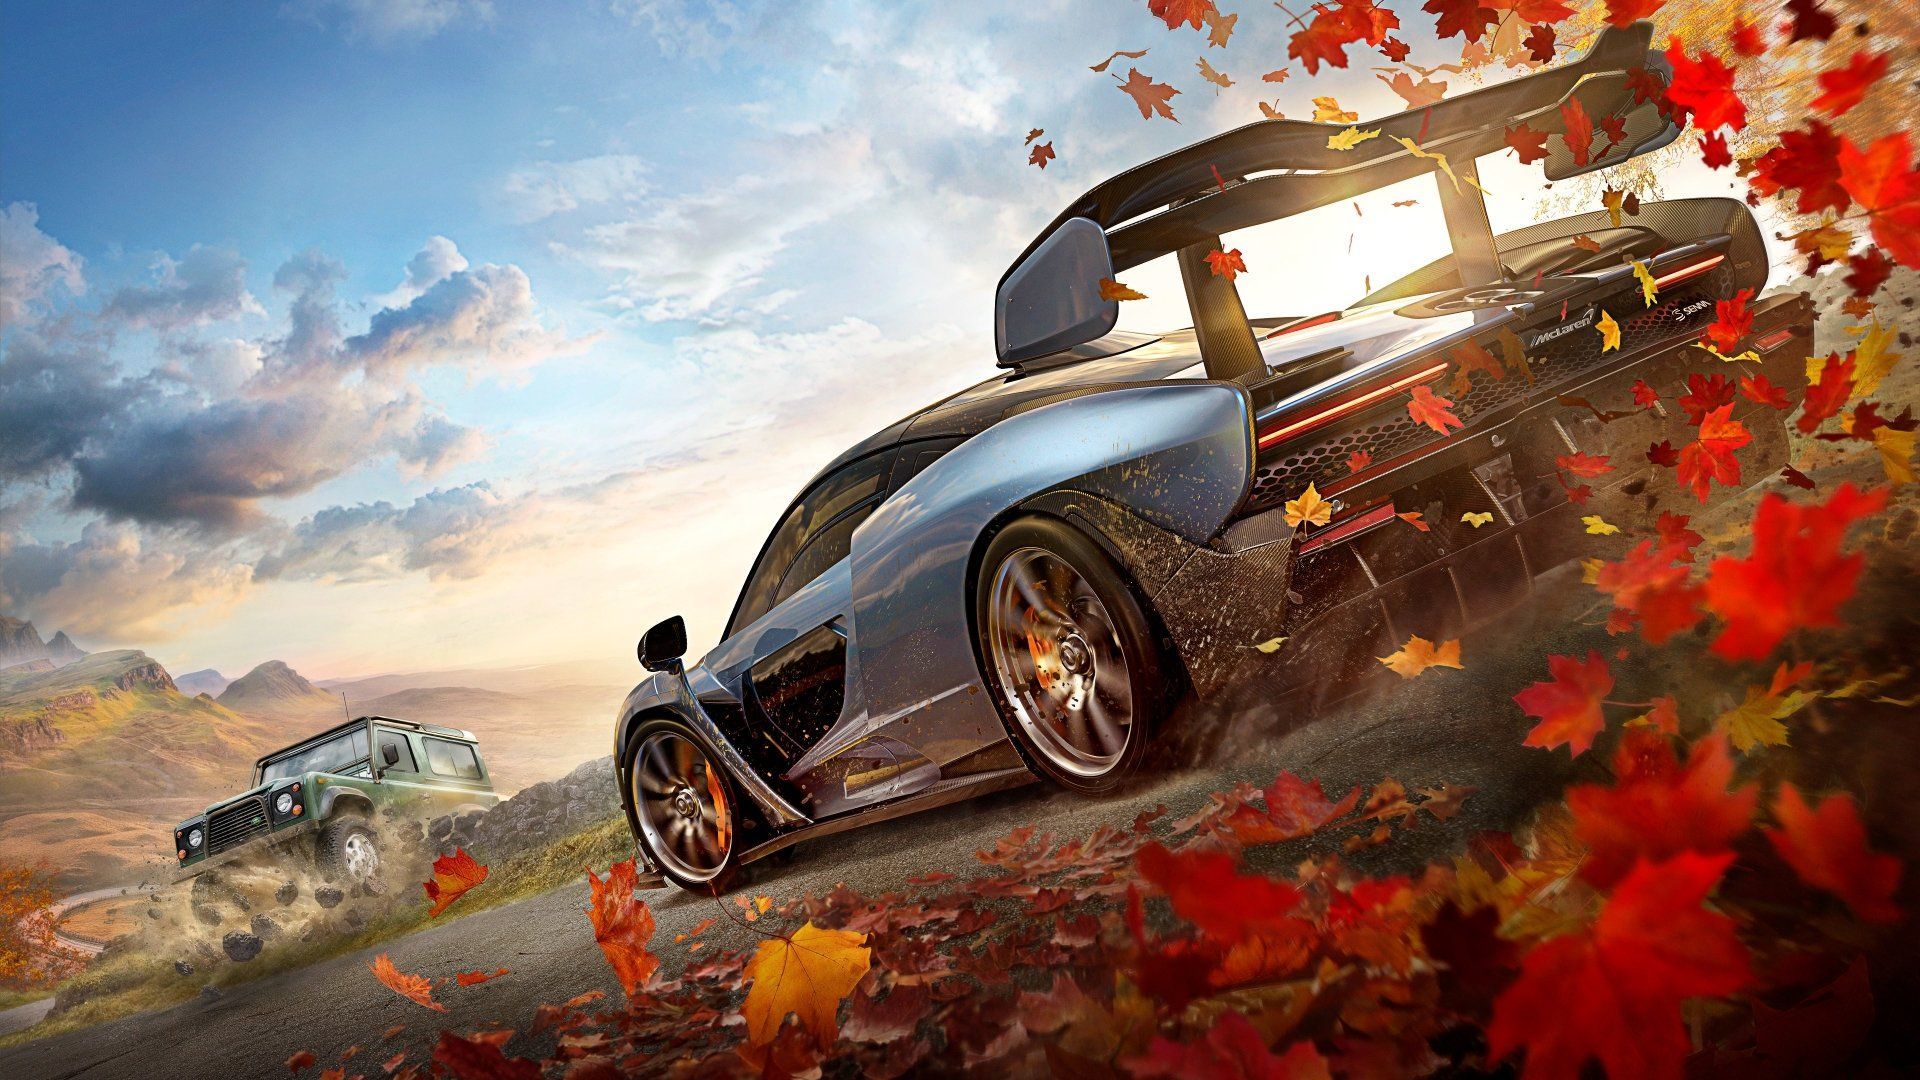 Forza Horizon on Twitter A phone screen without a Forza wallpaper is just  not worth having httpstcoLzCiJTgolS  Twitter